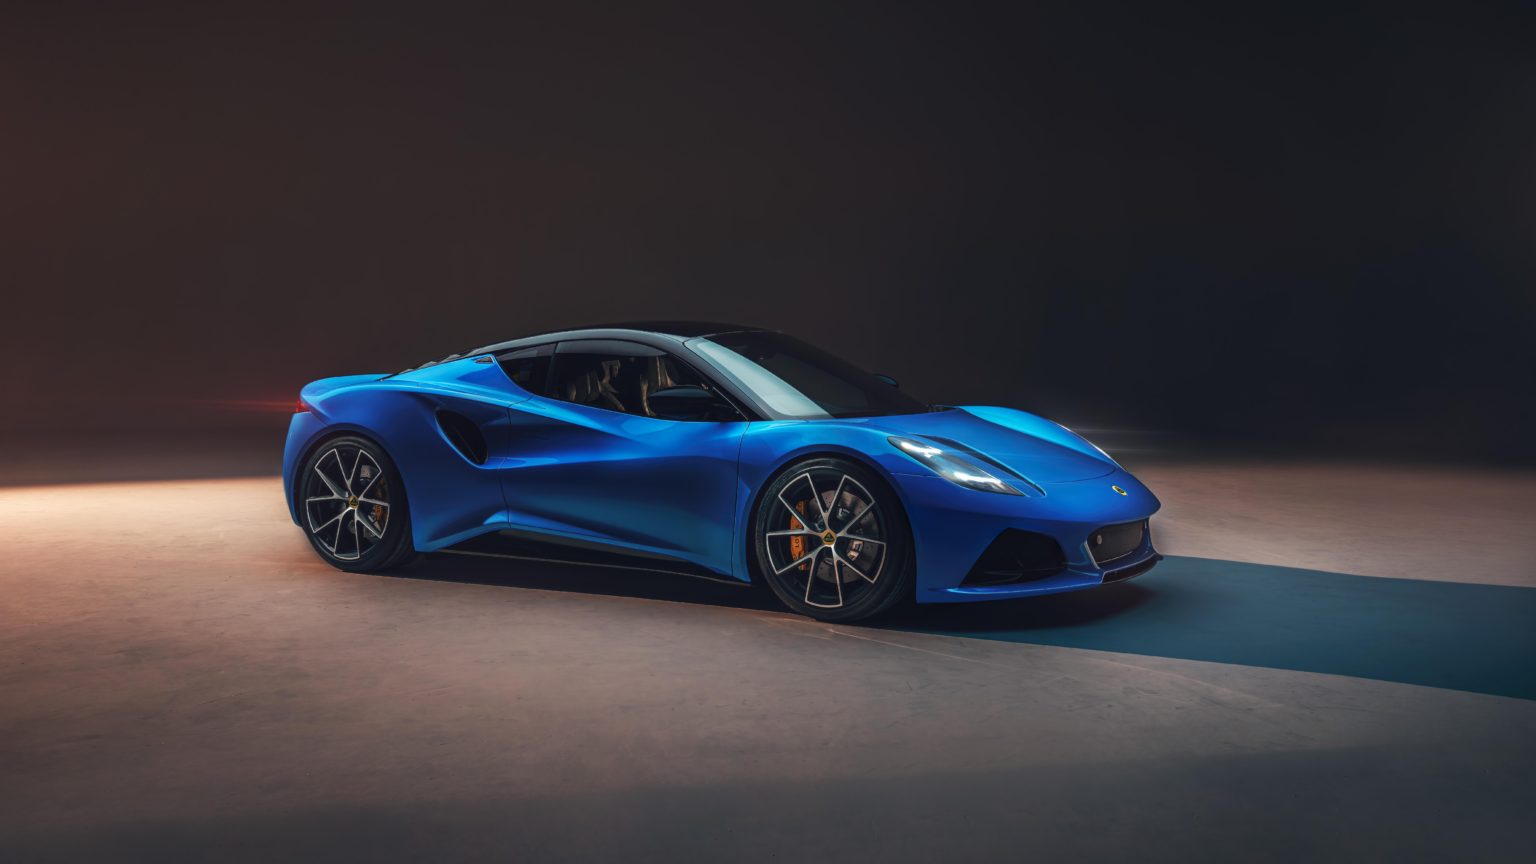 The Emira will be Lotus' last gas-powered car.